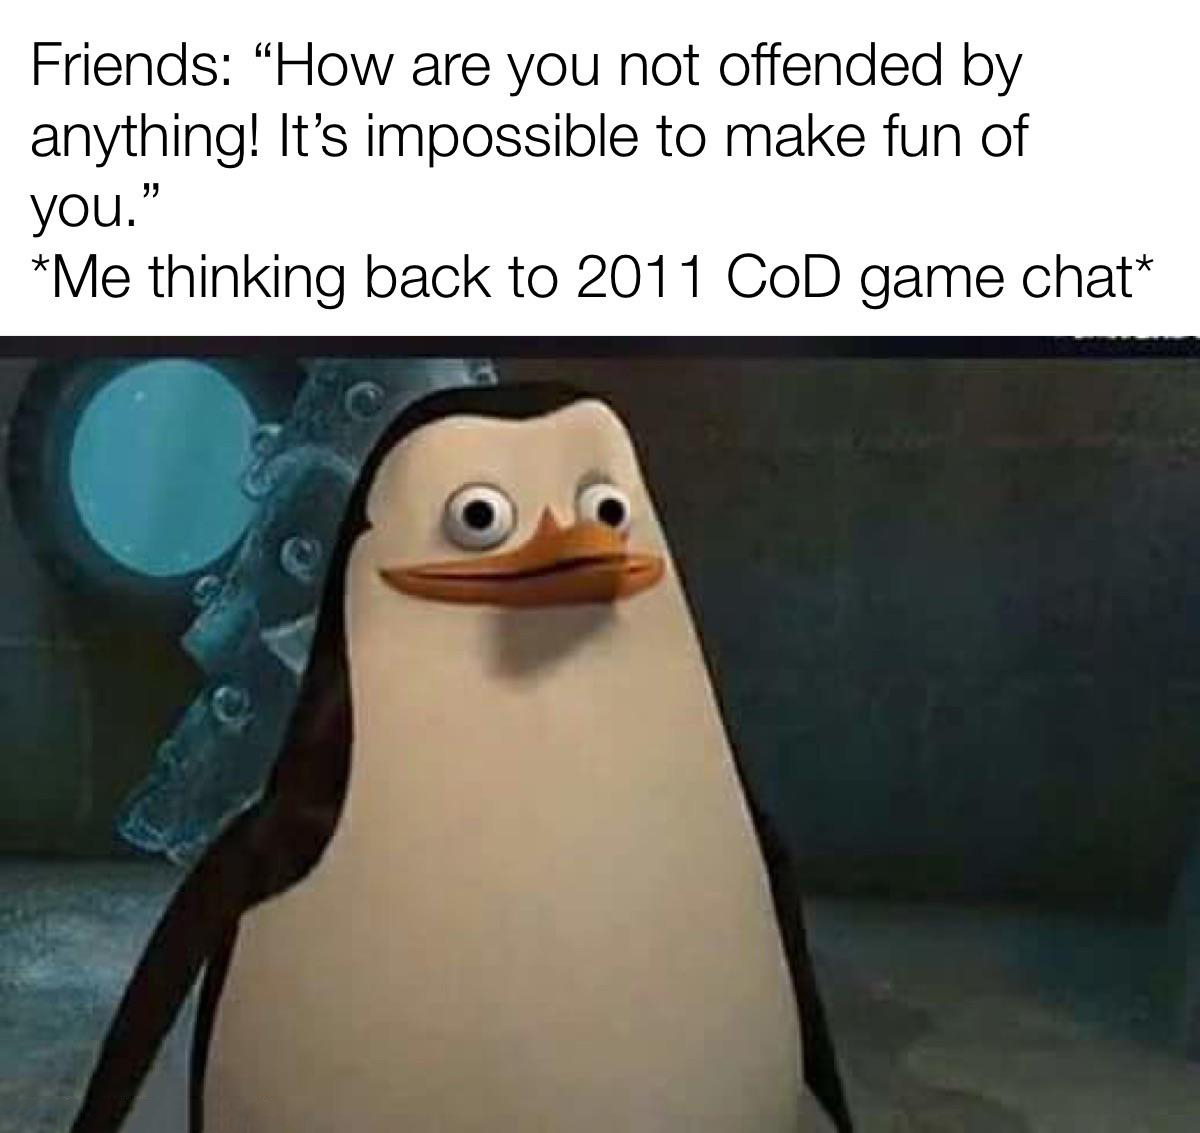 dank memes - madagascar pingouin meme - Friends "How are you not offended by anything! It's impossible to make fun of you." Me thinking back to 2011 CoD game chat